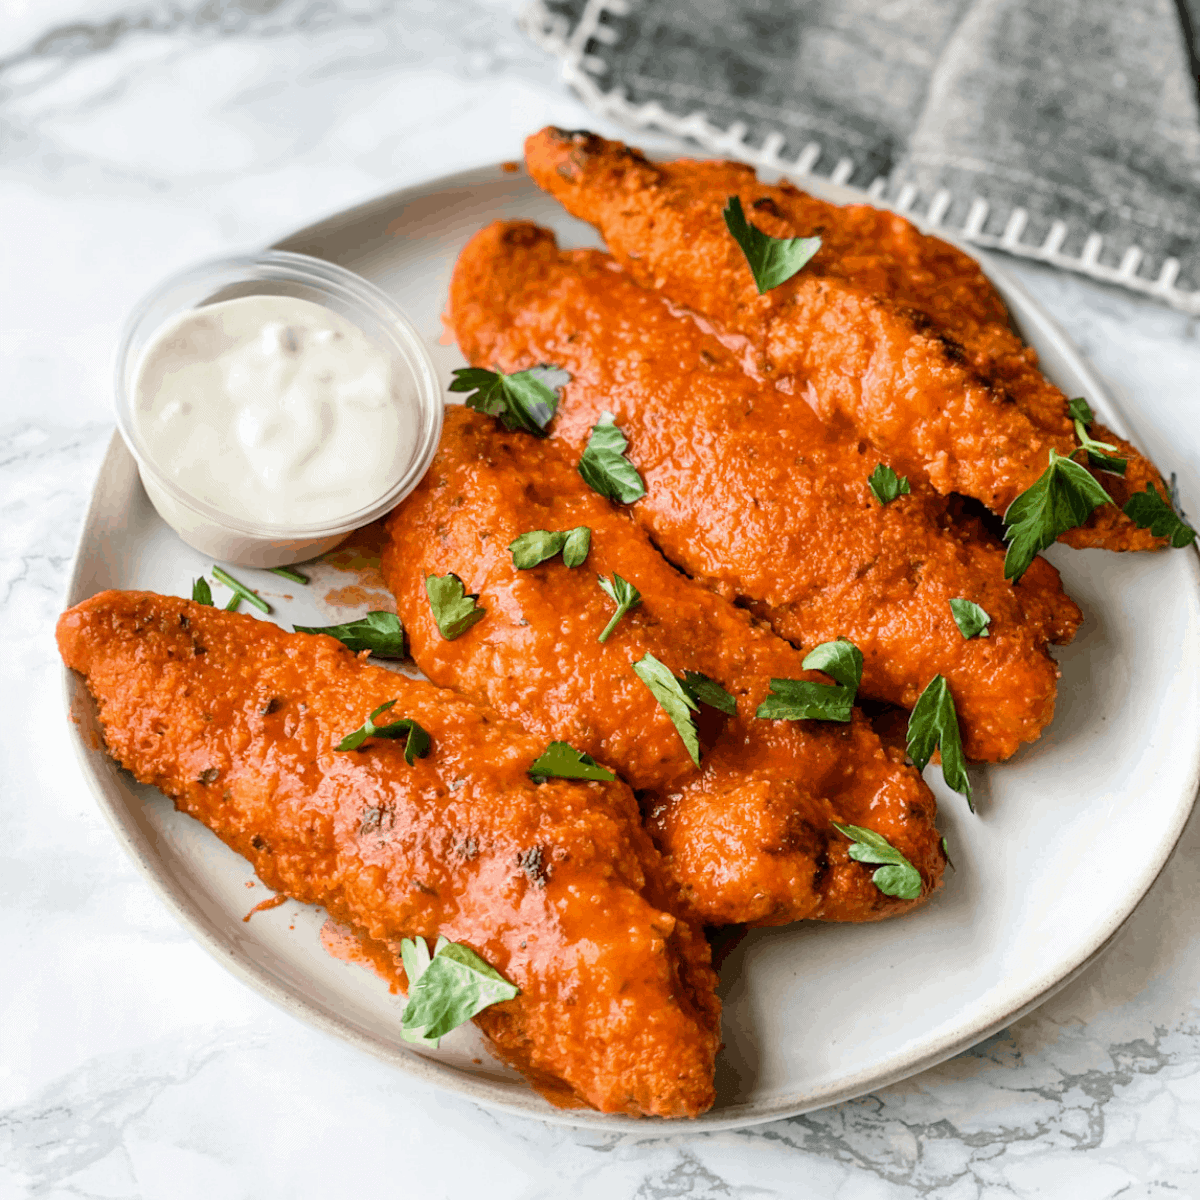 Baked Buffalo Chicken tenders. Healthy chicken tenders baked till crispy and then tossed in a delicious buffalo sauce. 